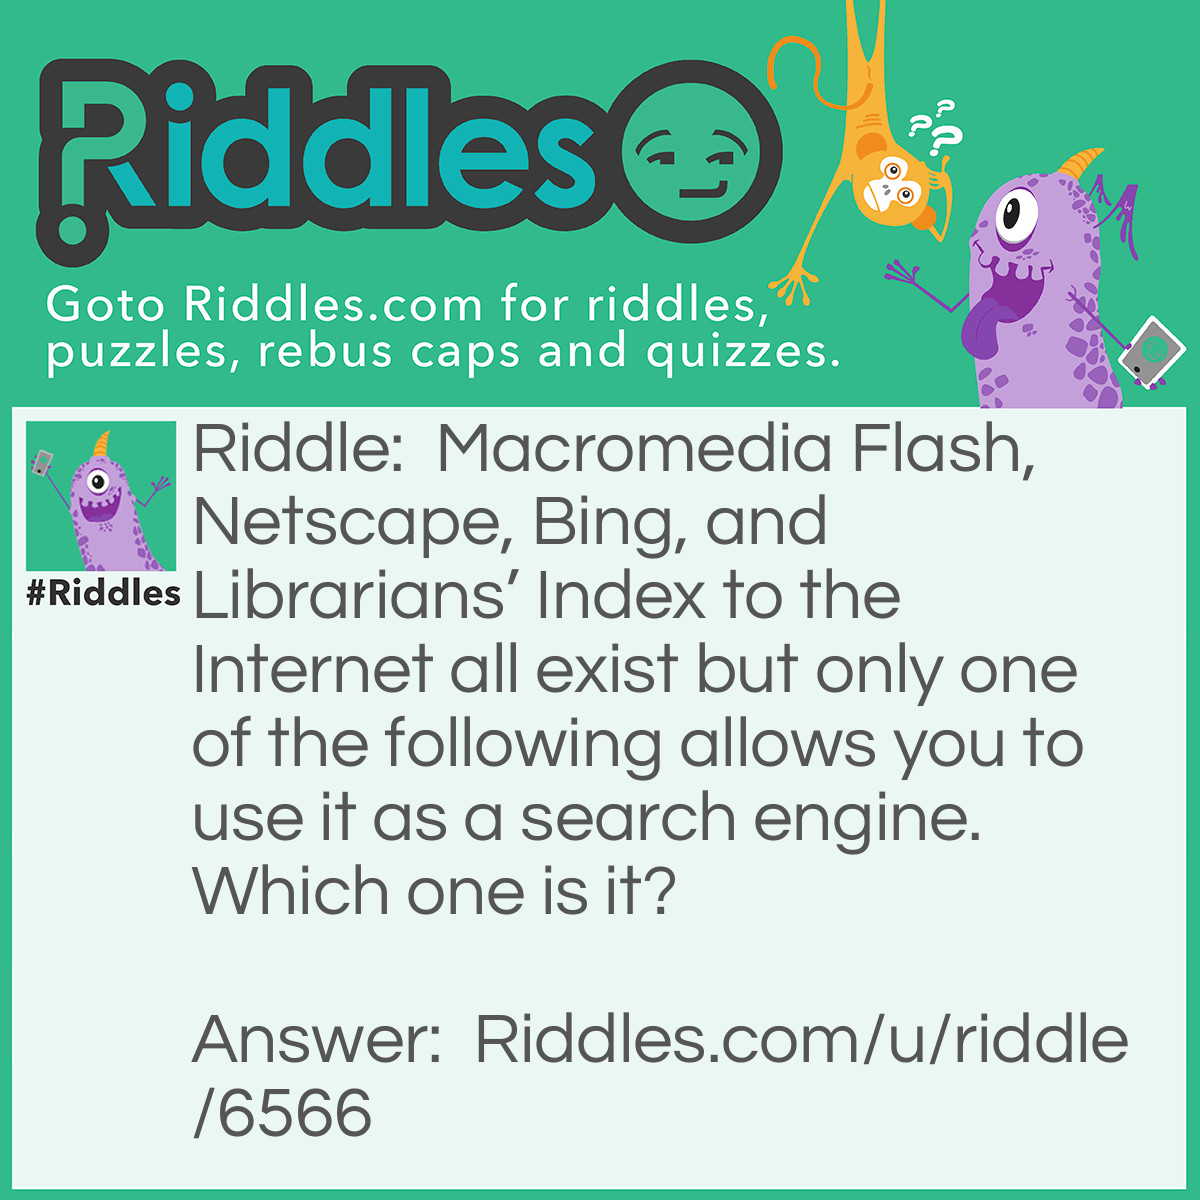 Riddle: Macromedia Flash, Netscape, Bing, and Librarians' Index to the Internet all exist but only one of the following allows you to use it as a search engine. Which one is it? Answer: Bing.